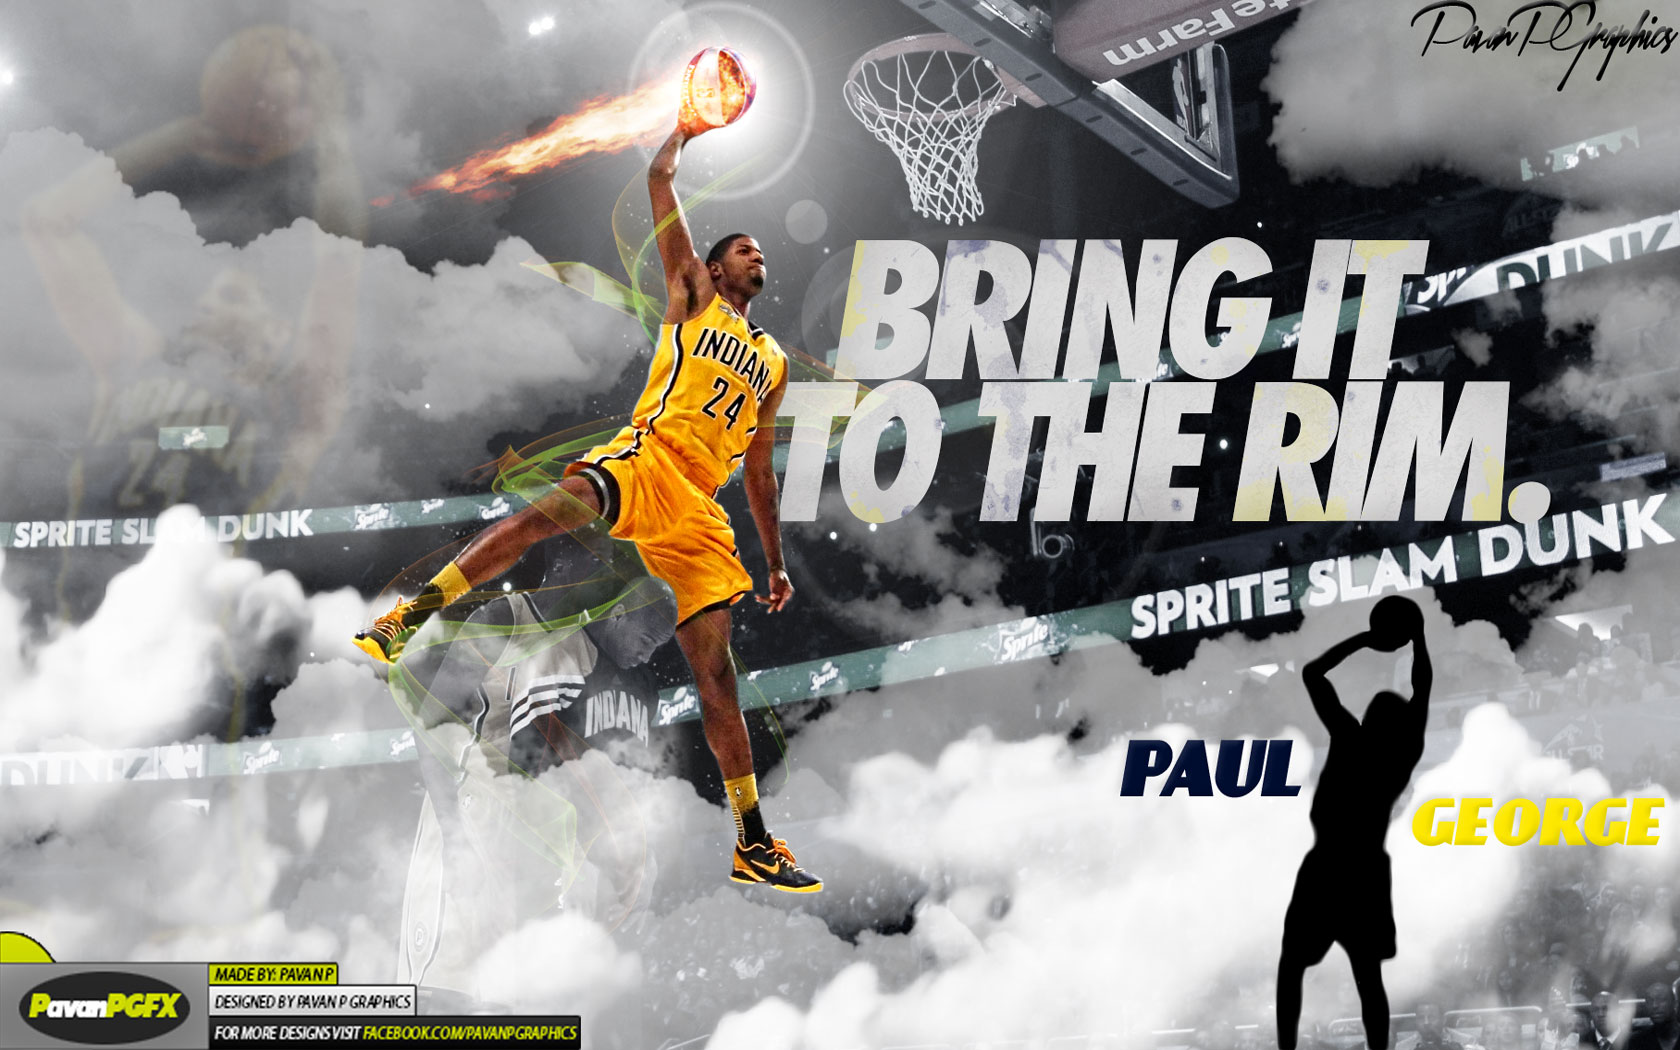 paul george wallpaper hd,product,competition event,graphic design,fan,player